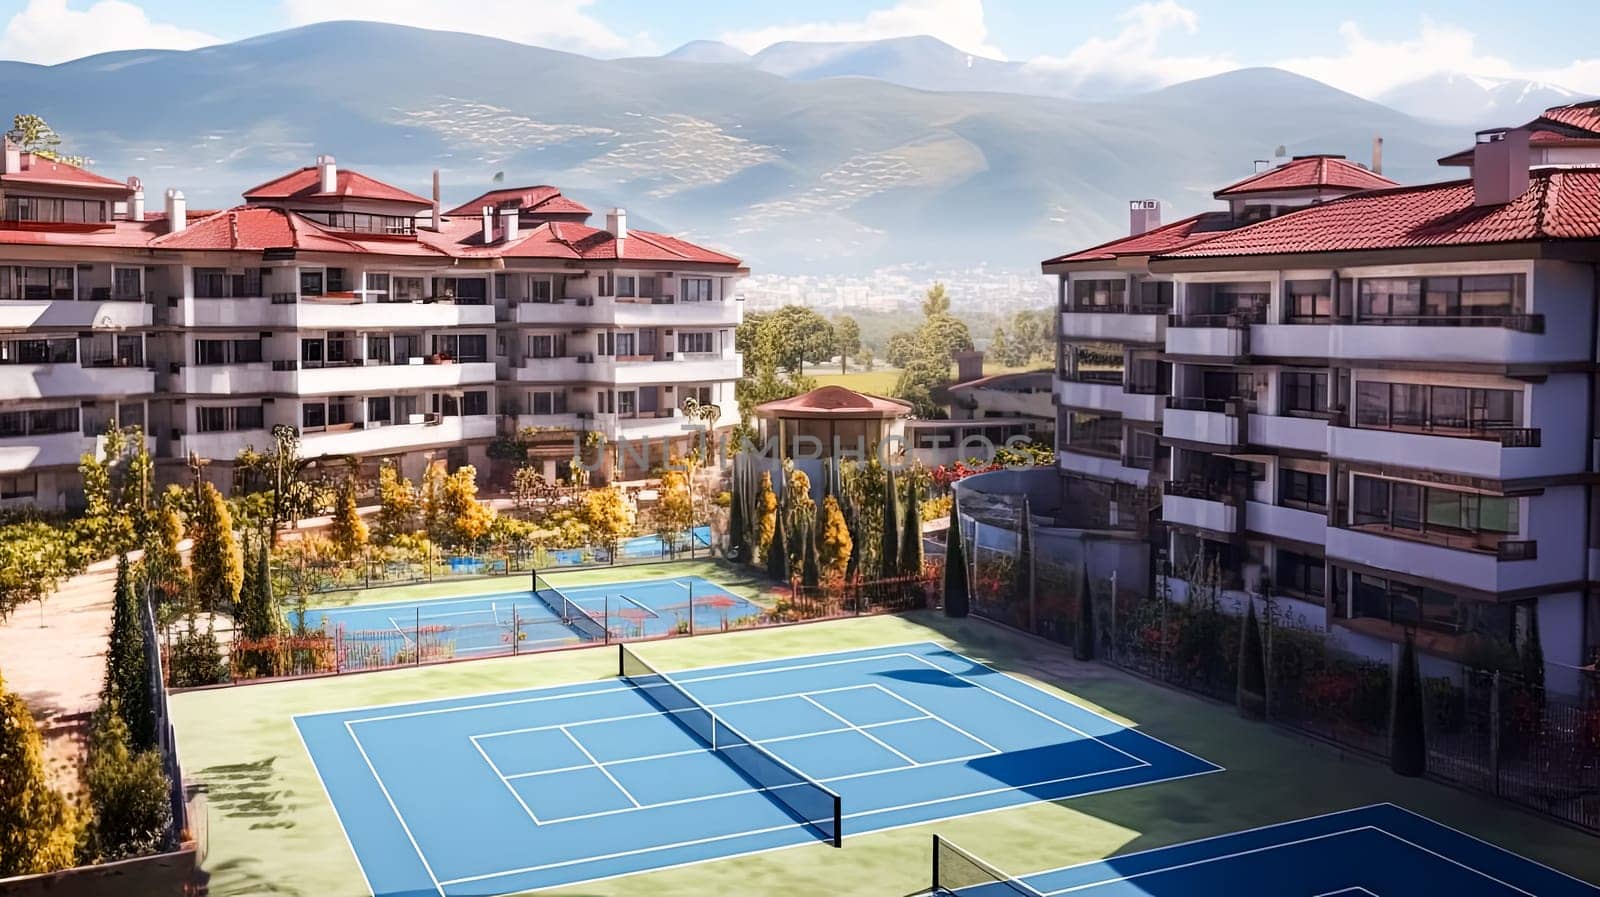 A tennis court is nestled amidst lush greenery, bordered by a verdant field and overlooked by a grand building, creating a picturesque sports setting.